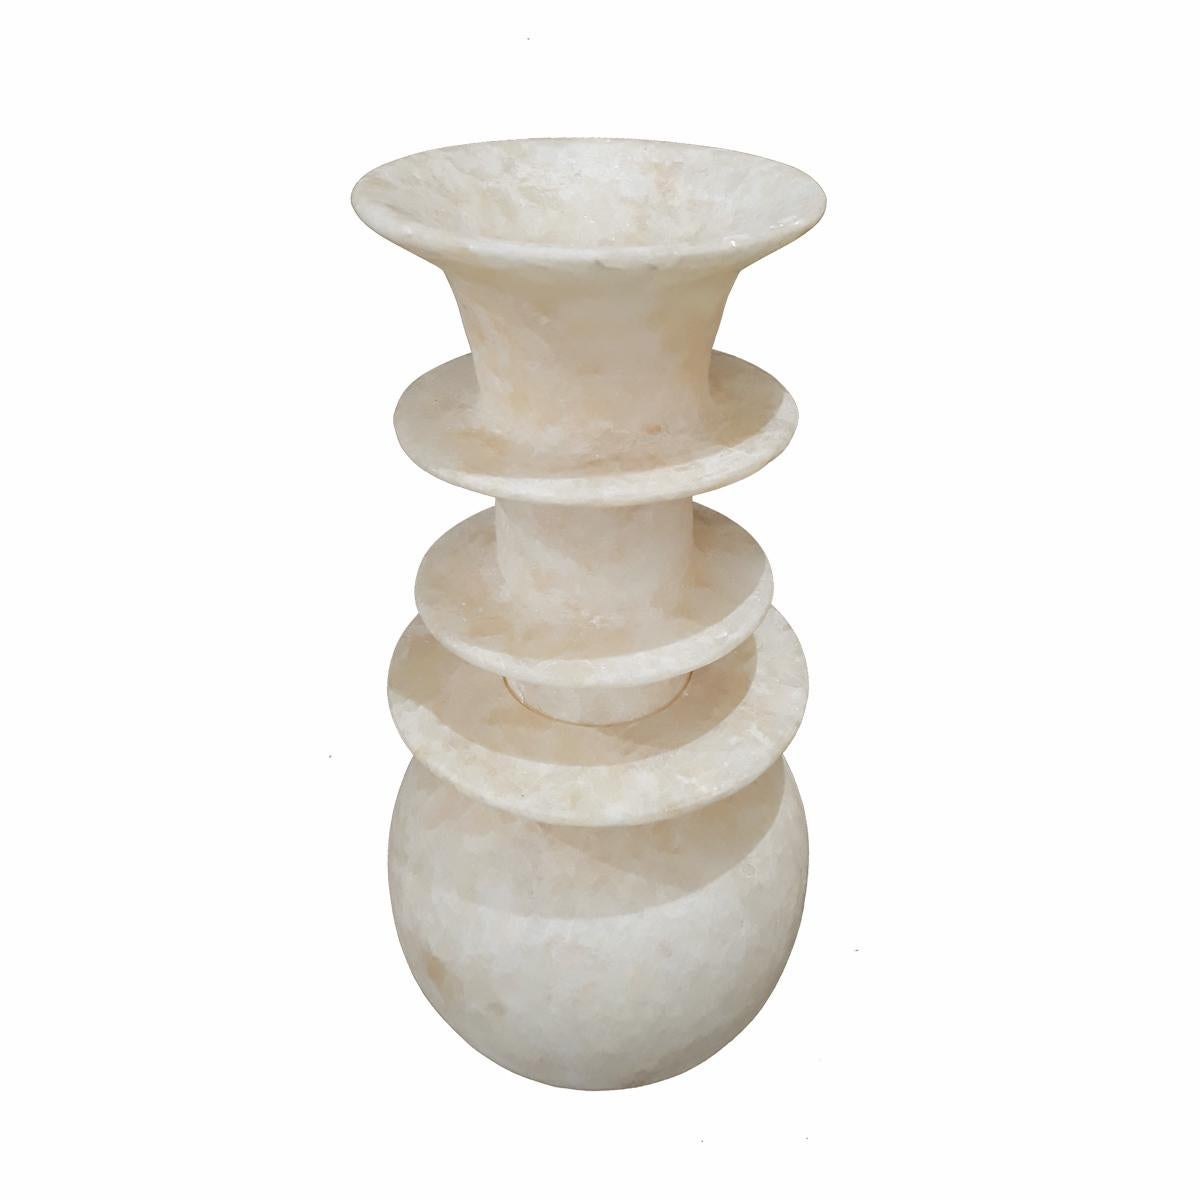 An alabaster vase, hand-crafted in Luxor, Egypt. Two pieces, with a bottom opening at the base. It allows the vase to be used as a lamp or screen for low-intensity lights (professional conversion recommended). 

The vase can be shipped in two pieces